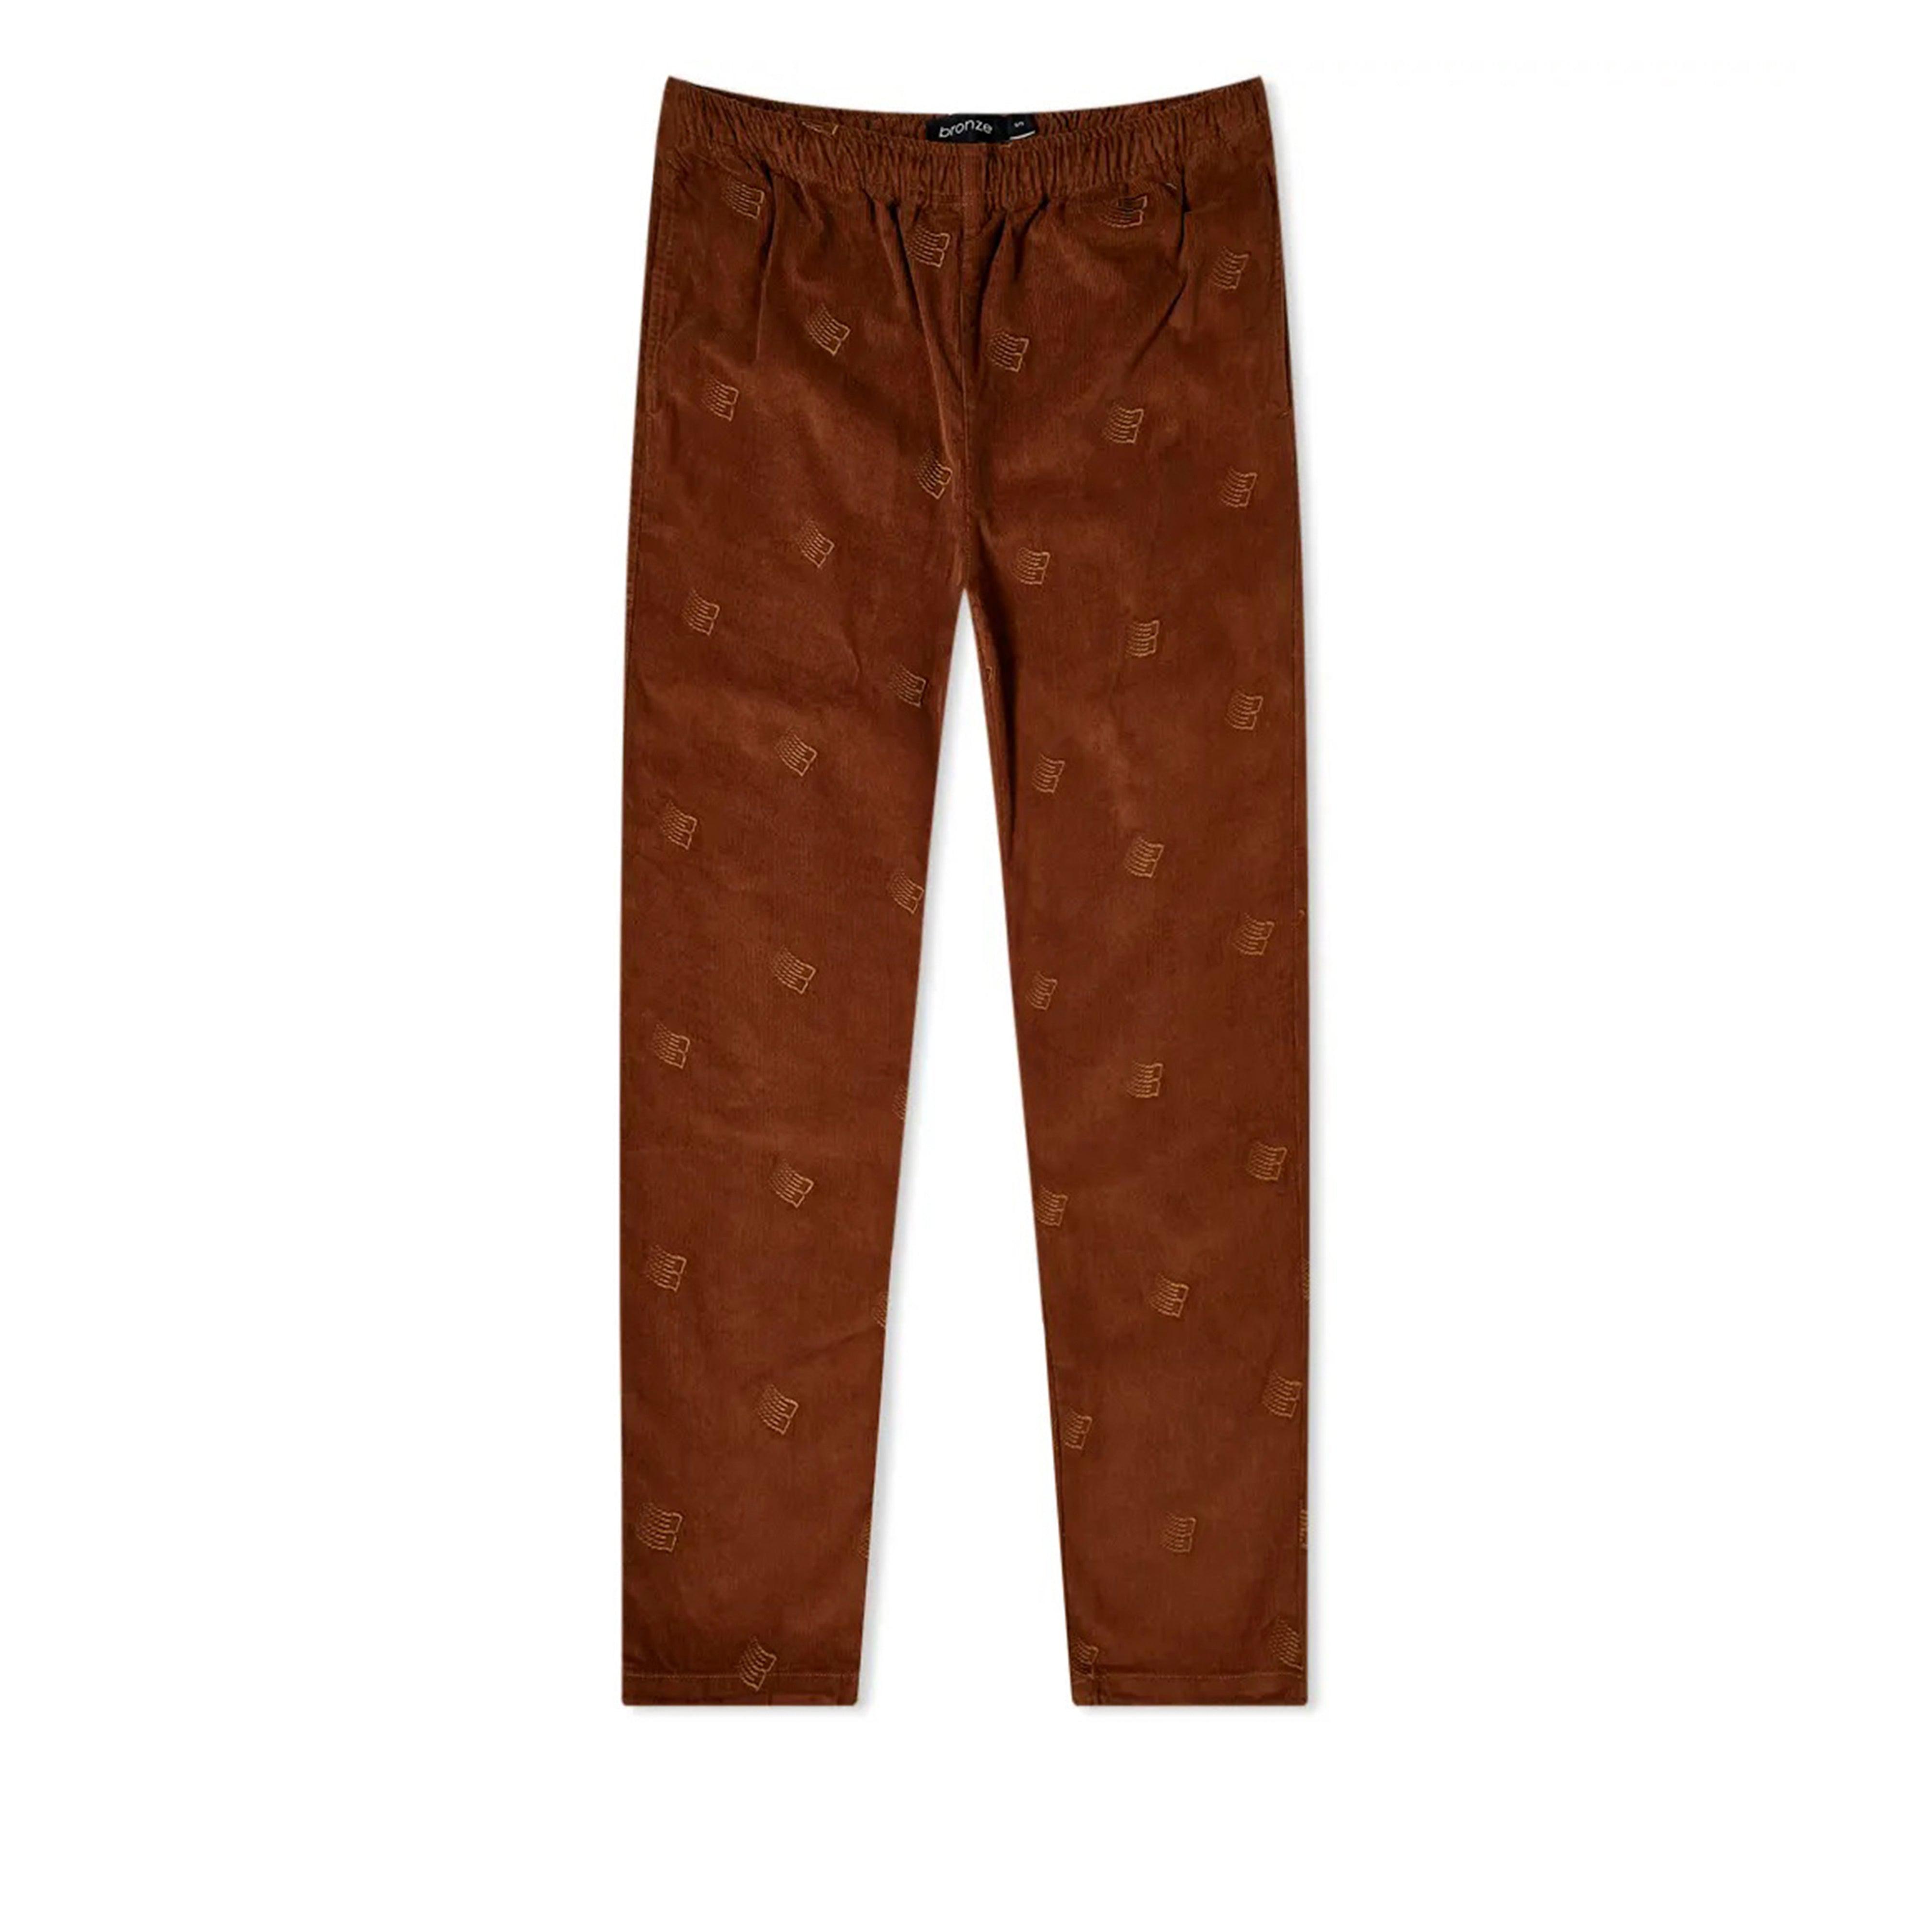 Bronze 56K Embroidered Corduroy Pants (Brown) by BRONZE 56K